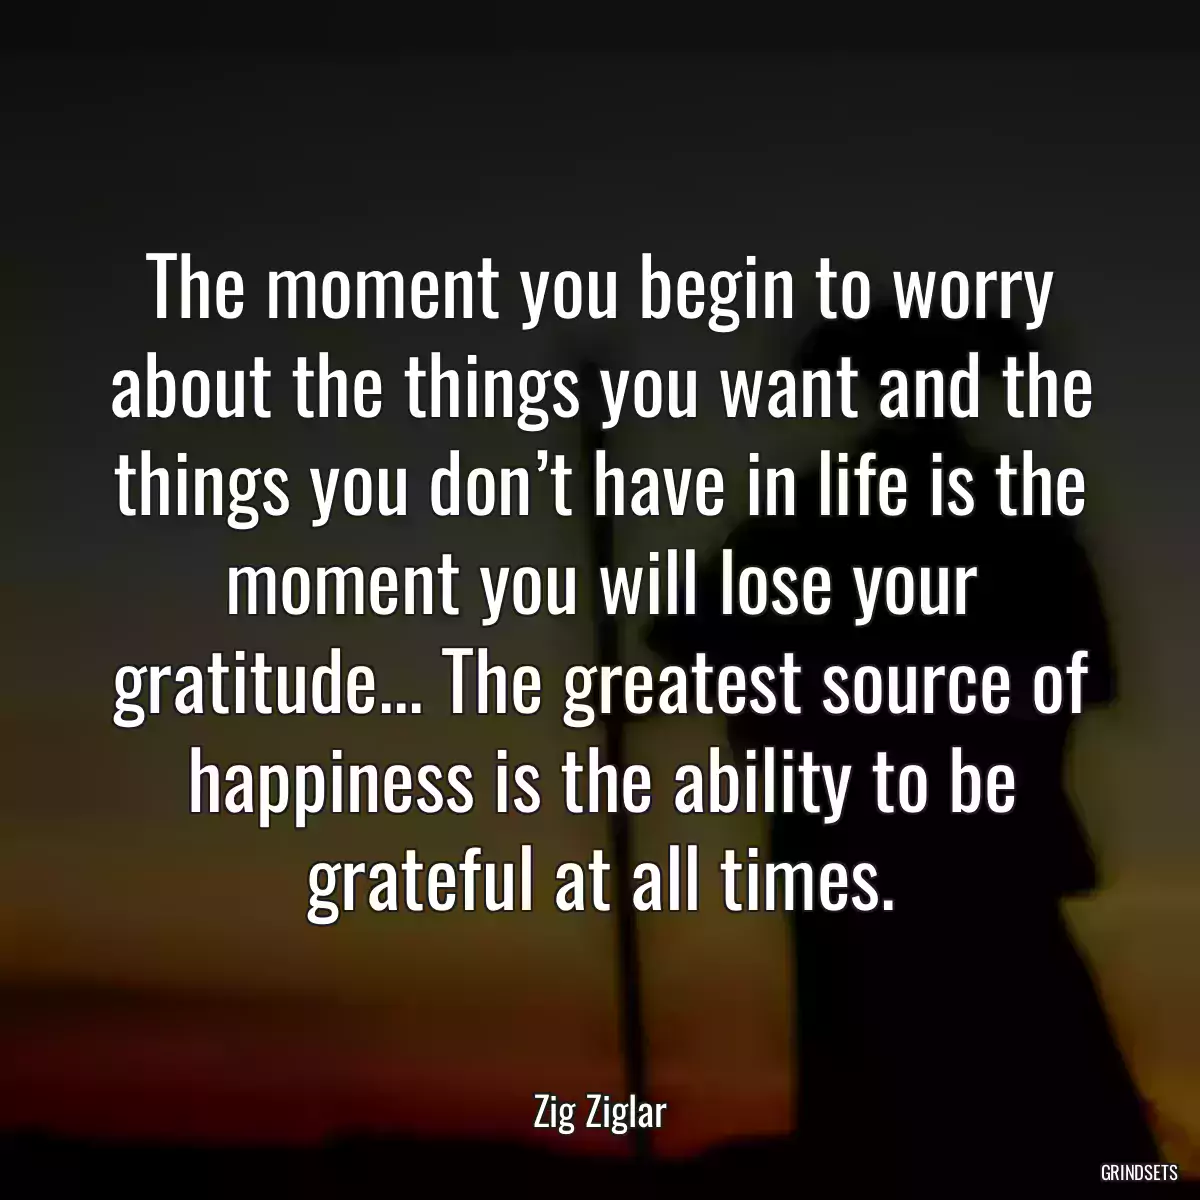 The moment you begin to worry about the things you want and the things you don’t have in life is the moment you will lose your gratitude... The greatest source of happiness is the ability to be grateful at all times.